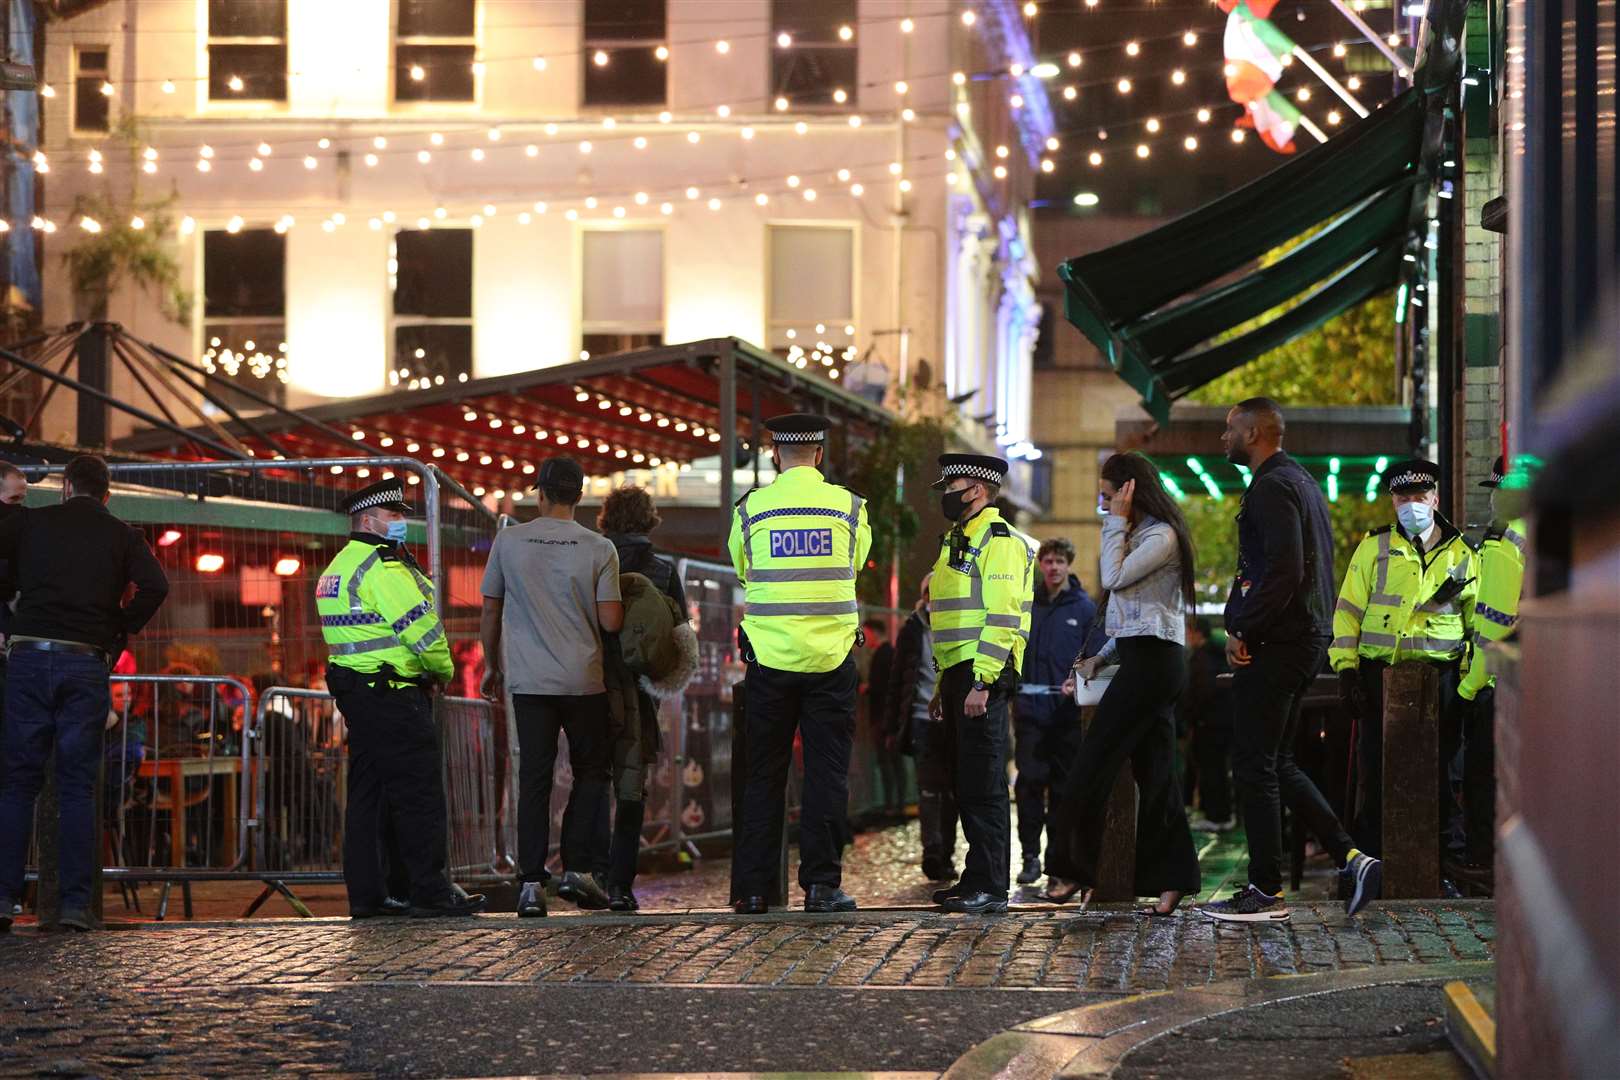 Police on patrol in Liverpool city centre ahead of the 10pm curfew (Peter Byrne/PA)